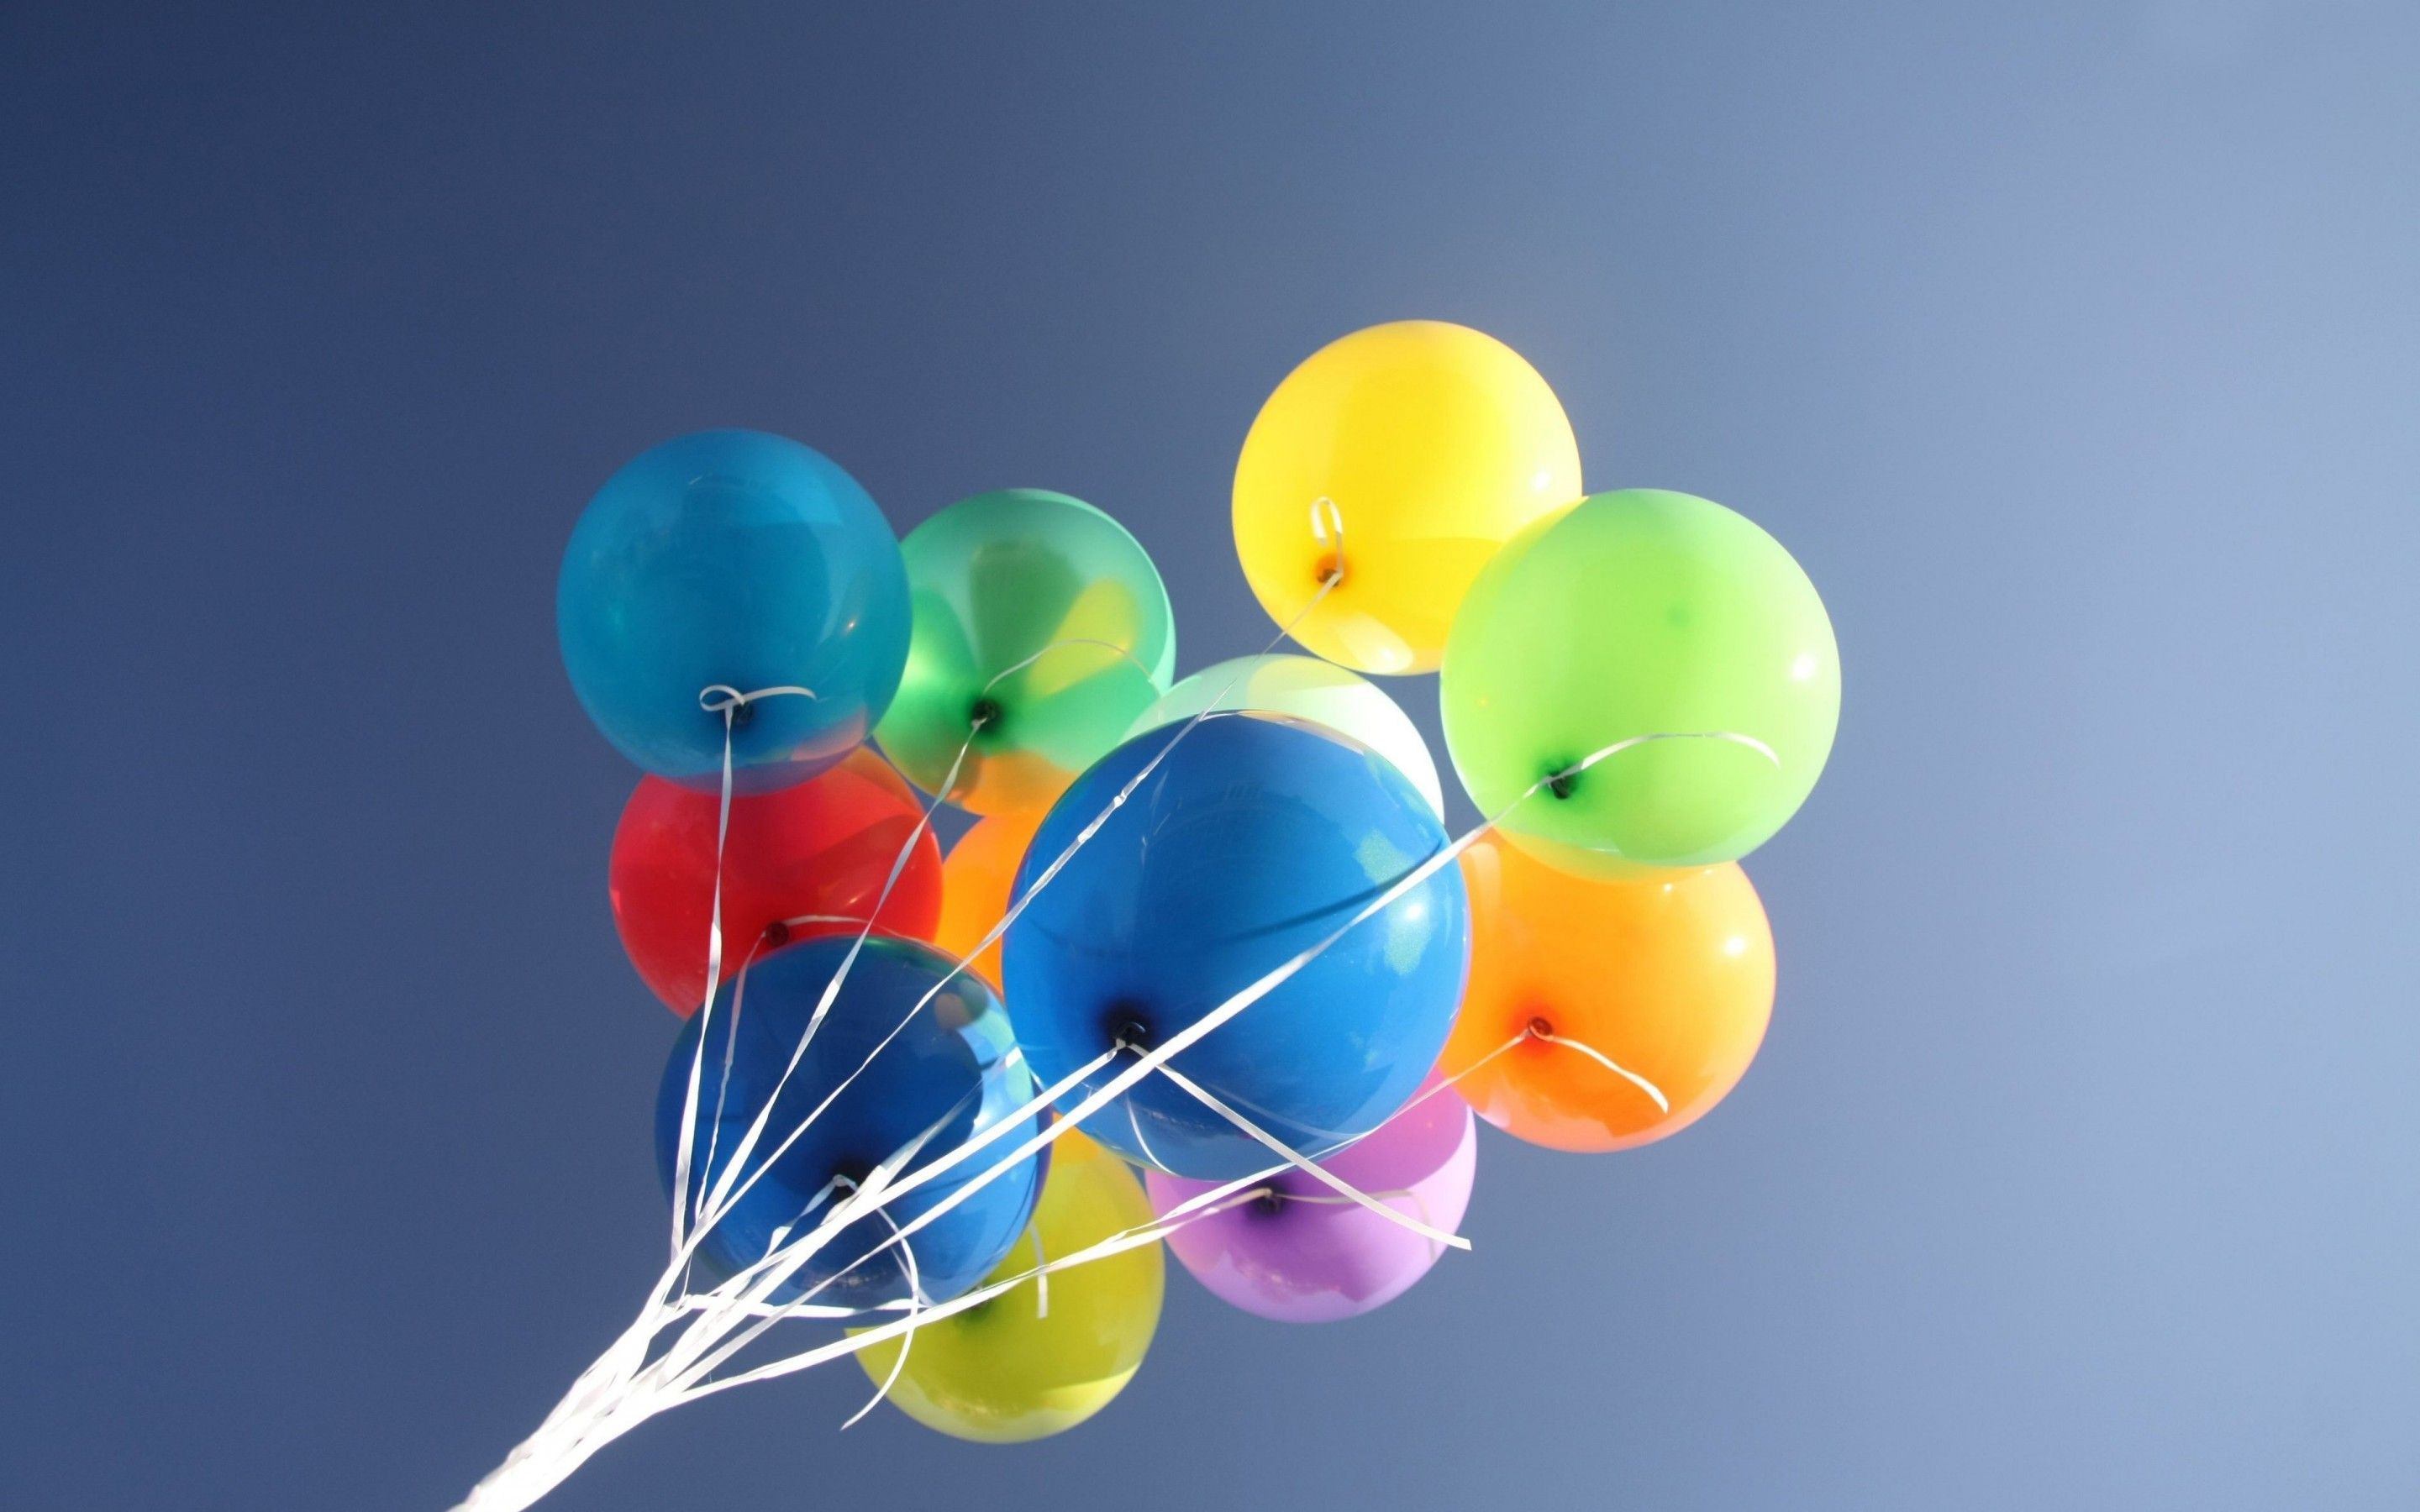 Multicolored Balloon Cell Phone Wallpaper Images Free Download on Lovepik   400599336